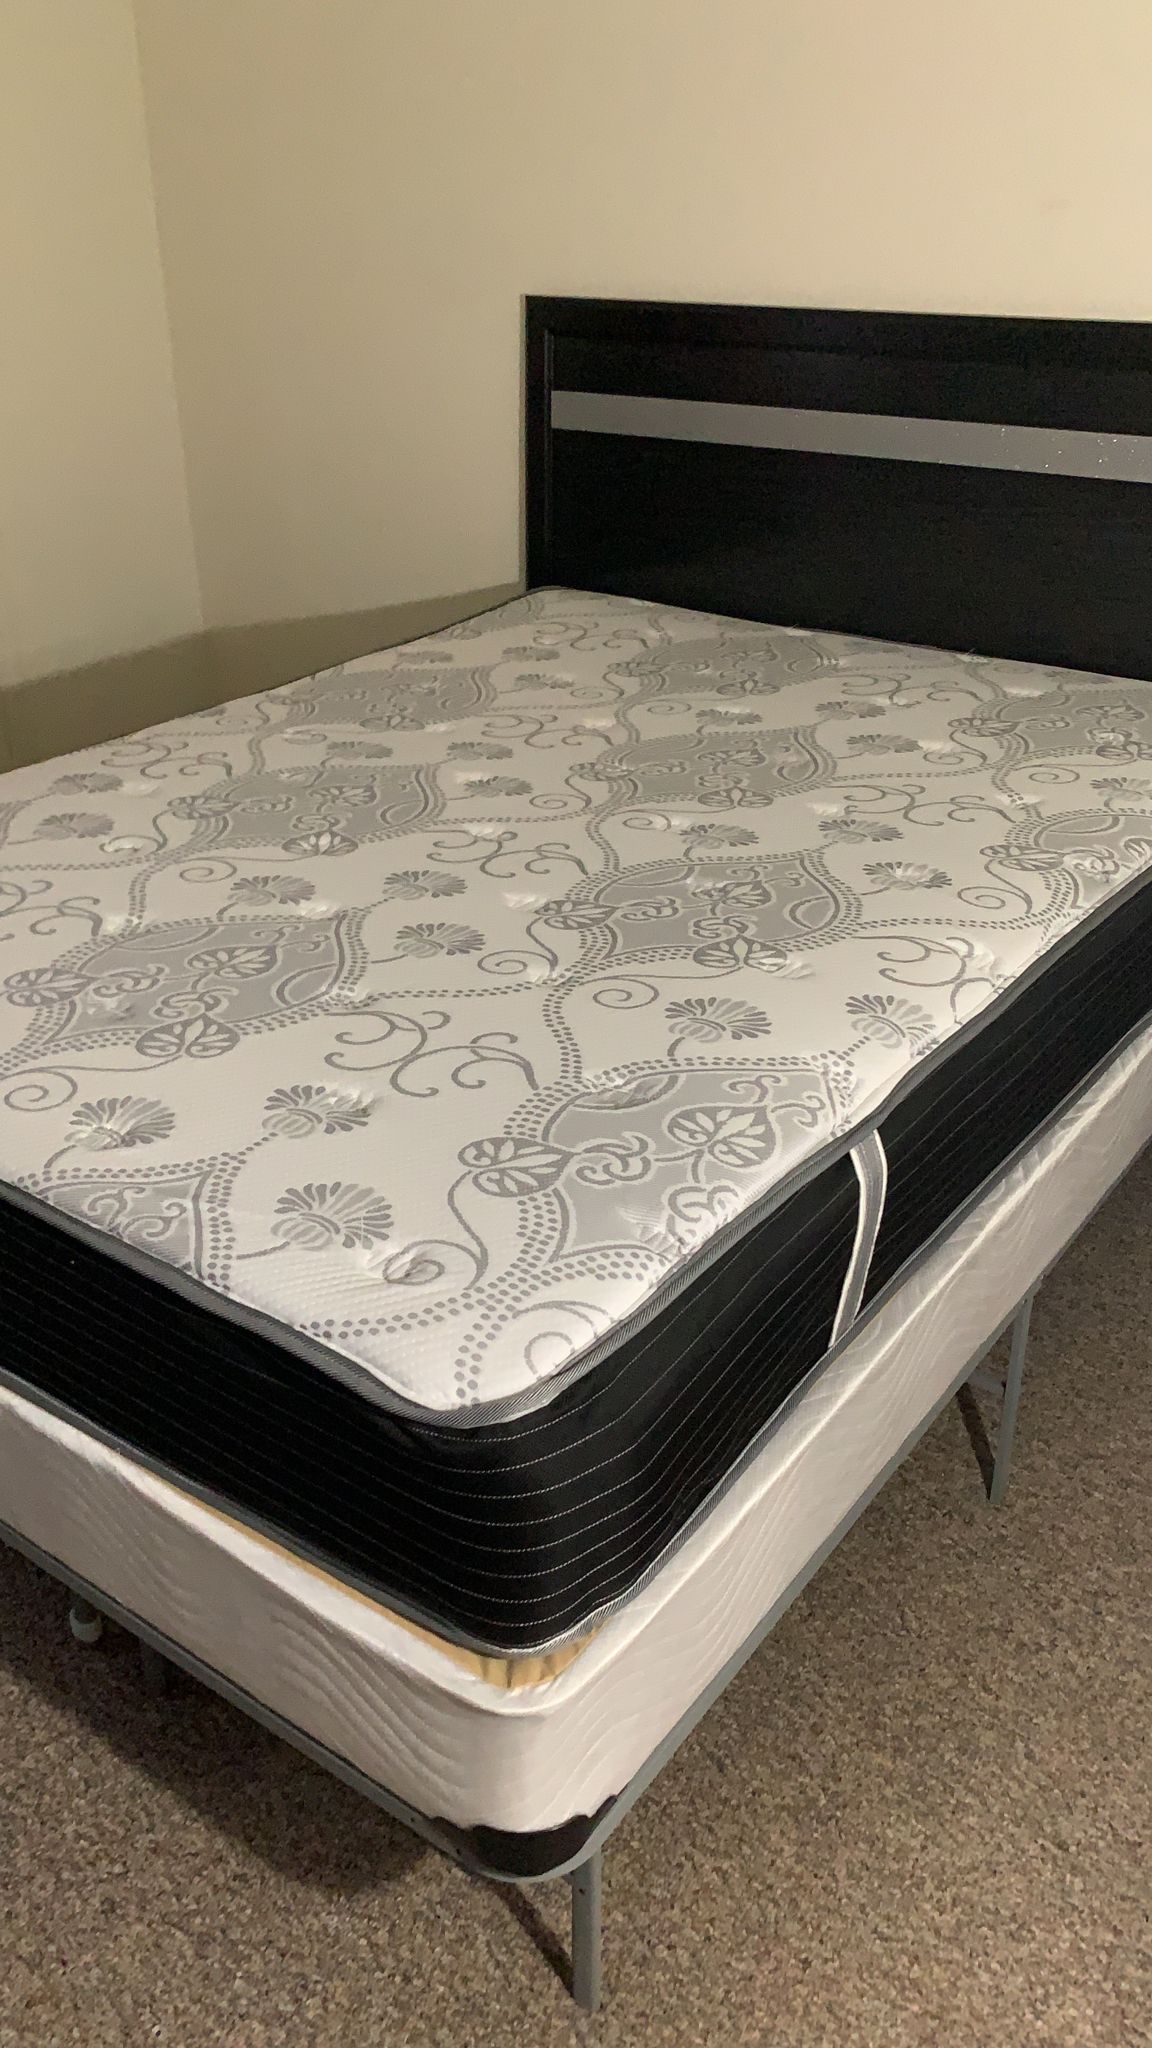 New Queen Mattress And Box Spring Bed Frame Is Not Included 